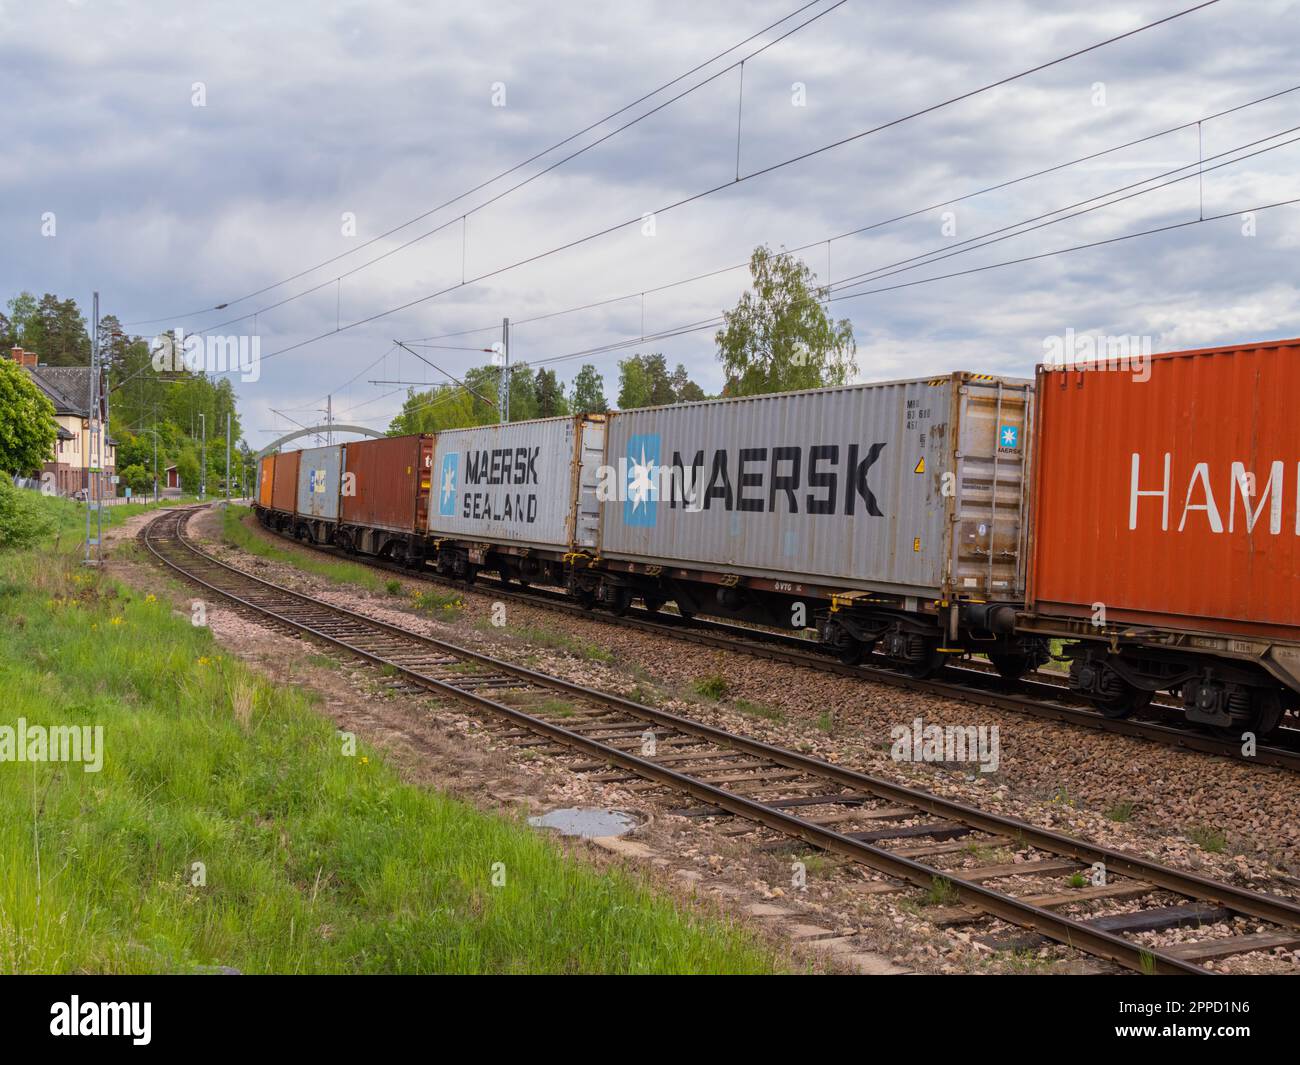 Angelsberg, Sweden - May 28, 2022: A freight train moves slowly along the winding railroad tracks, its cars filled with cargo and rolling stock. The s Stock Photo